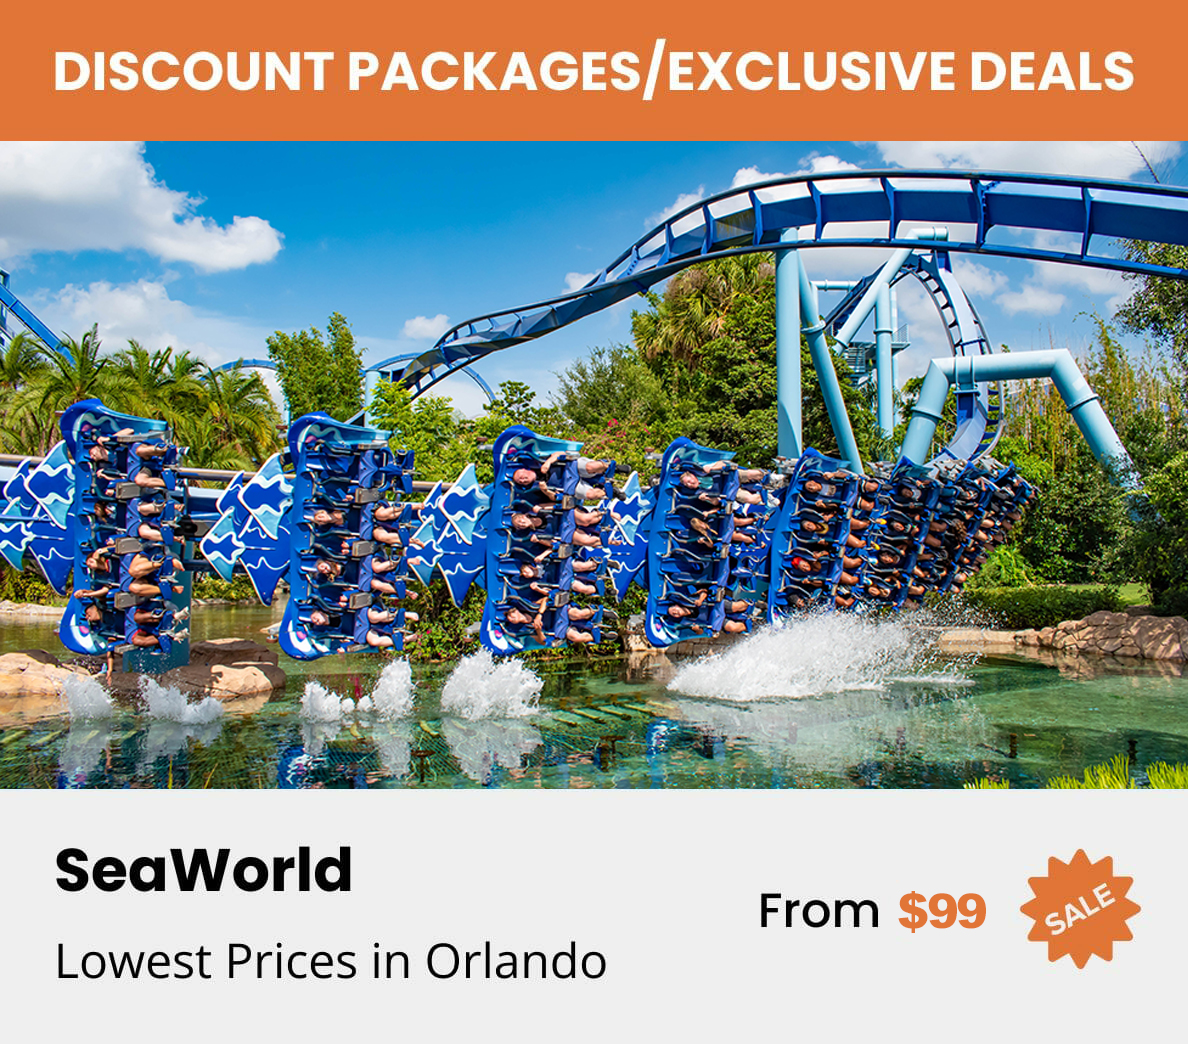 SeaWorld Discount Package and Exclusive Deals Orlandovacation.com